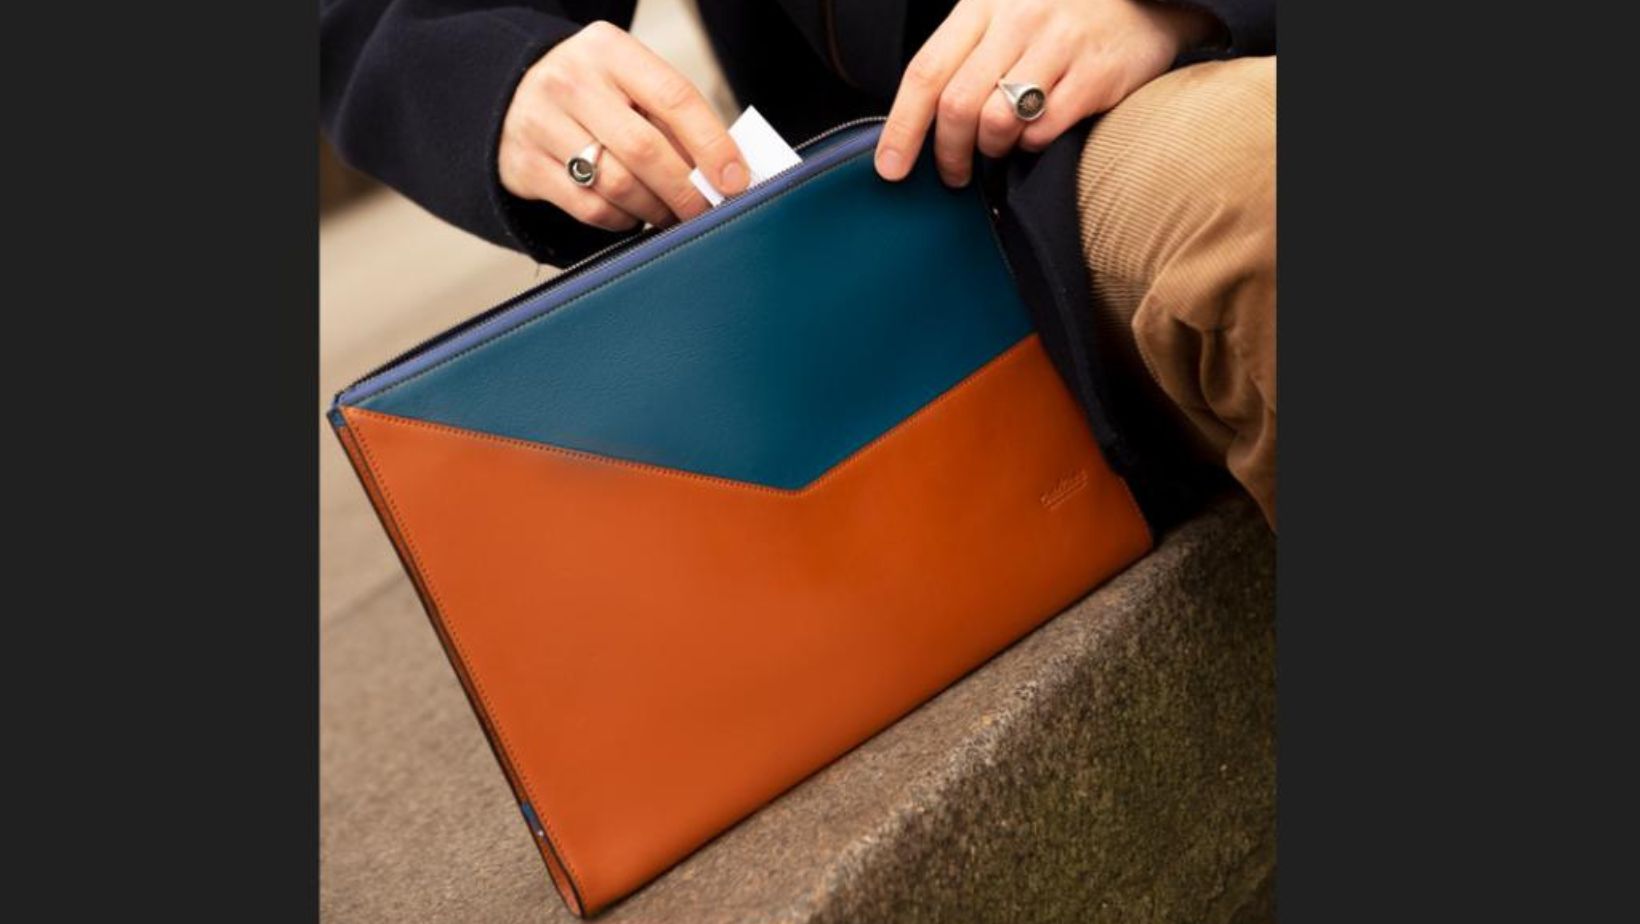 Optimizing Your Professional Presentation: A Guide to Selecting the Ideal Portfolio Bag